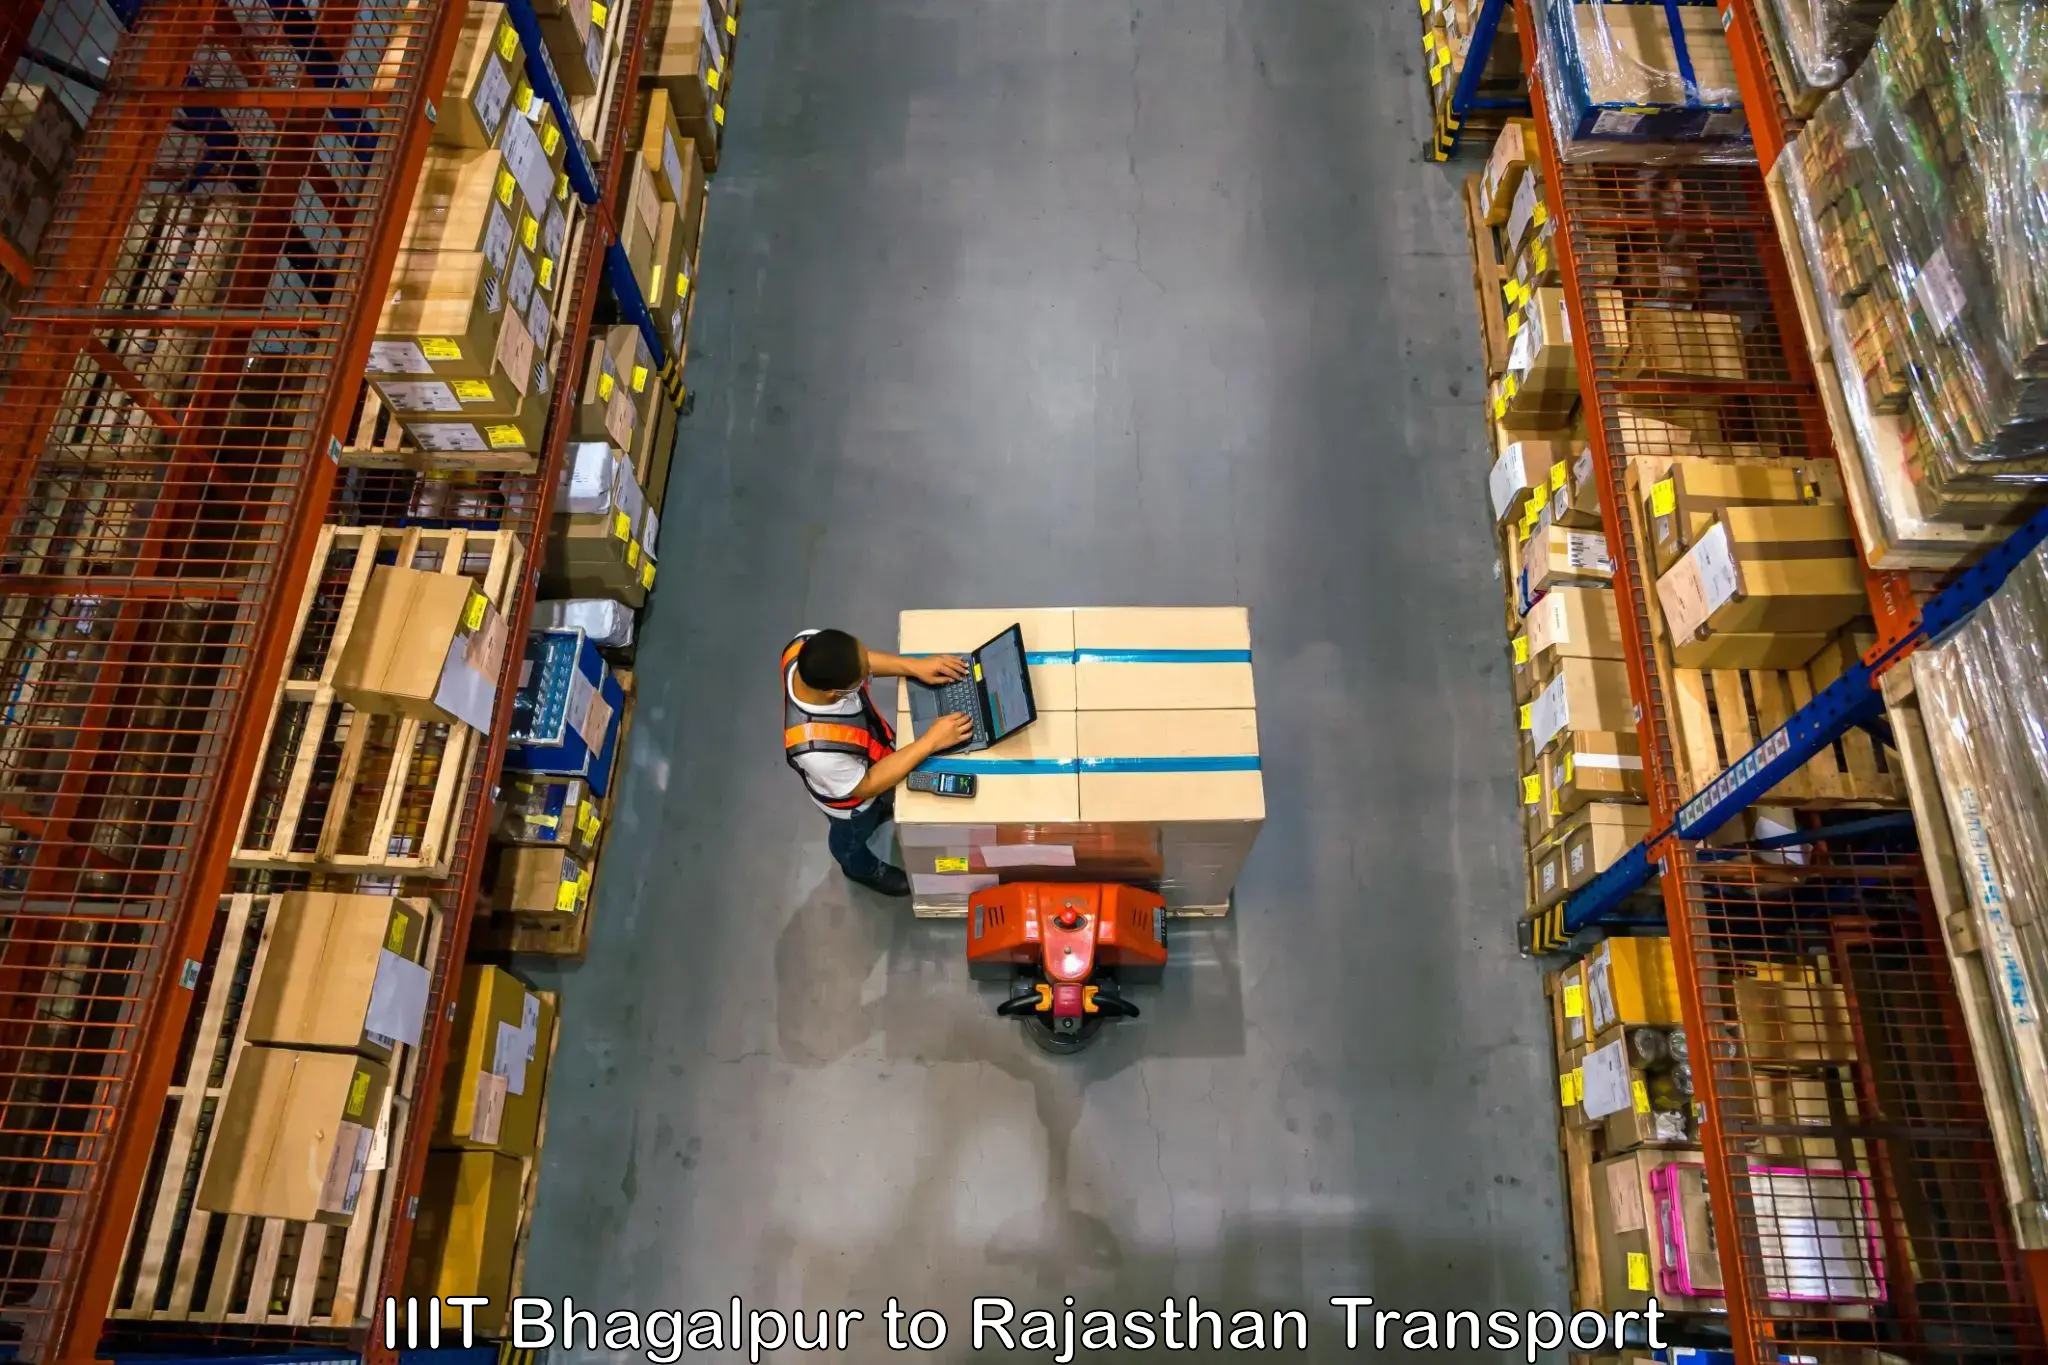 Parcel transport services IIIT Bhagalpur to Piparcity